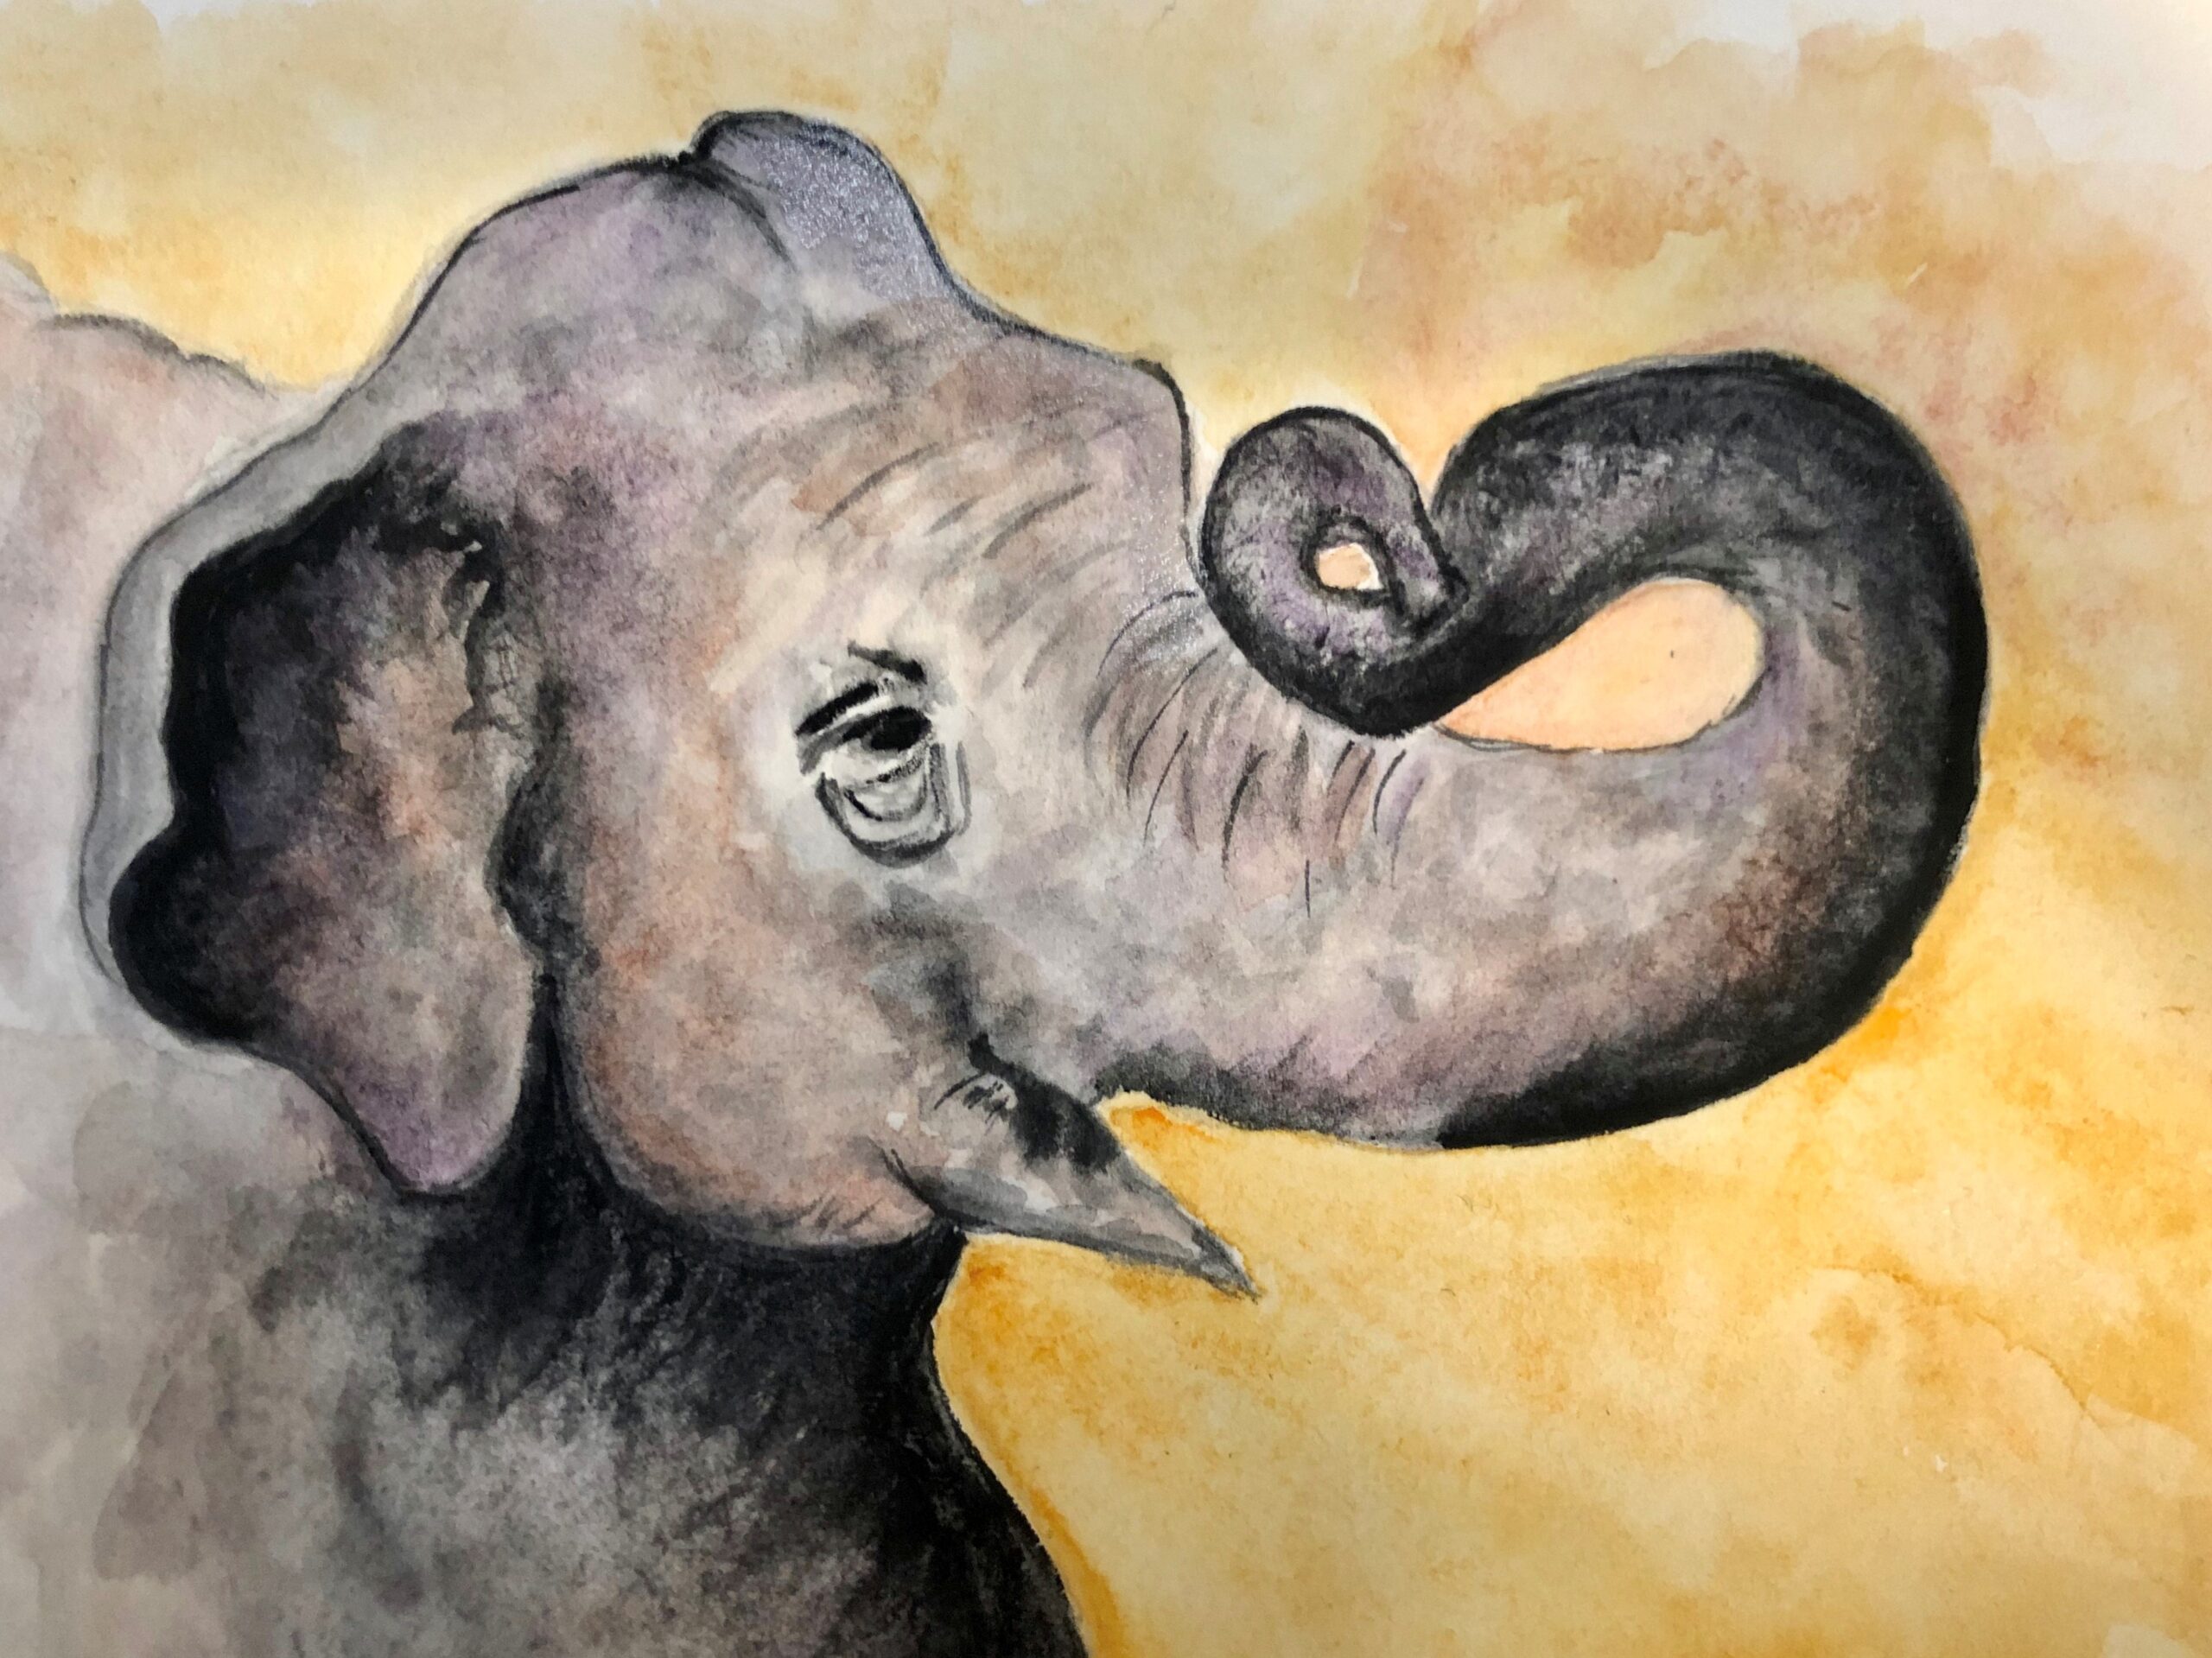 A watercolor painting of an elephant with a yellow background. The elephant is holding up his trunk and his large ears are visible.